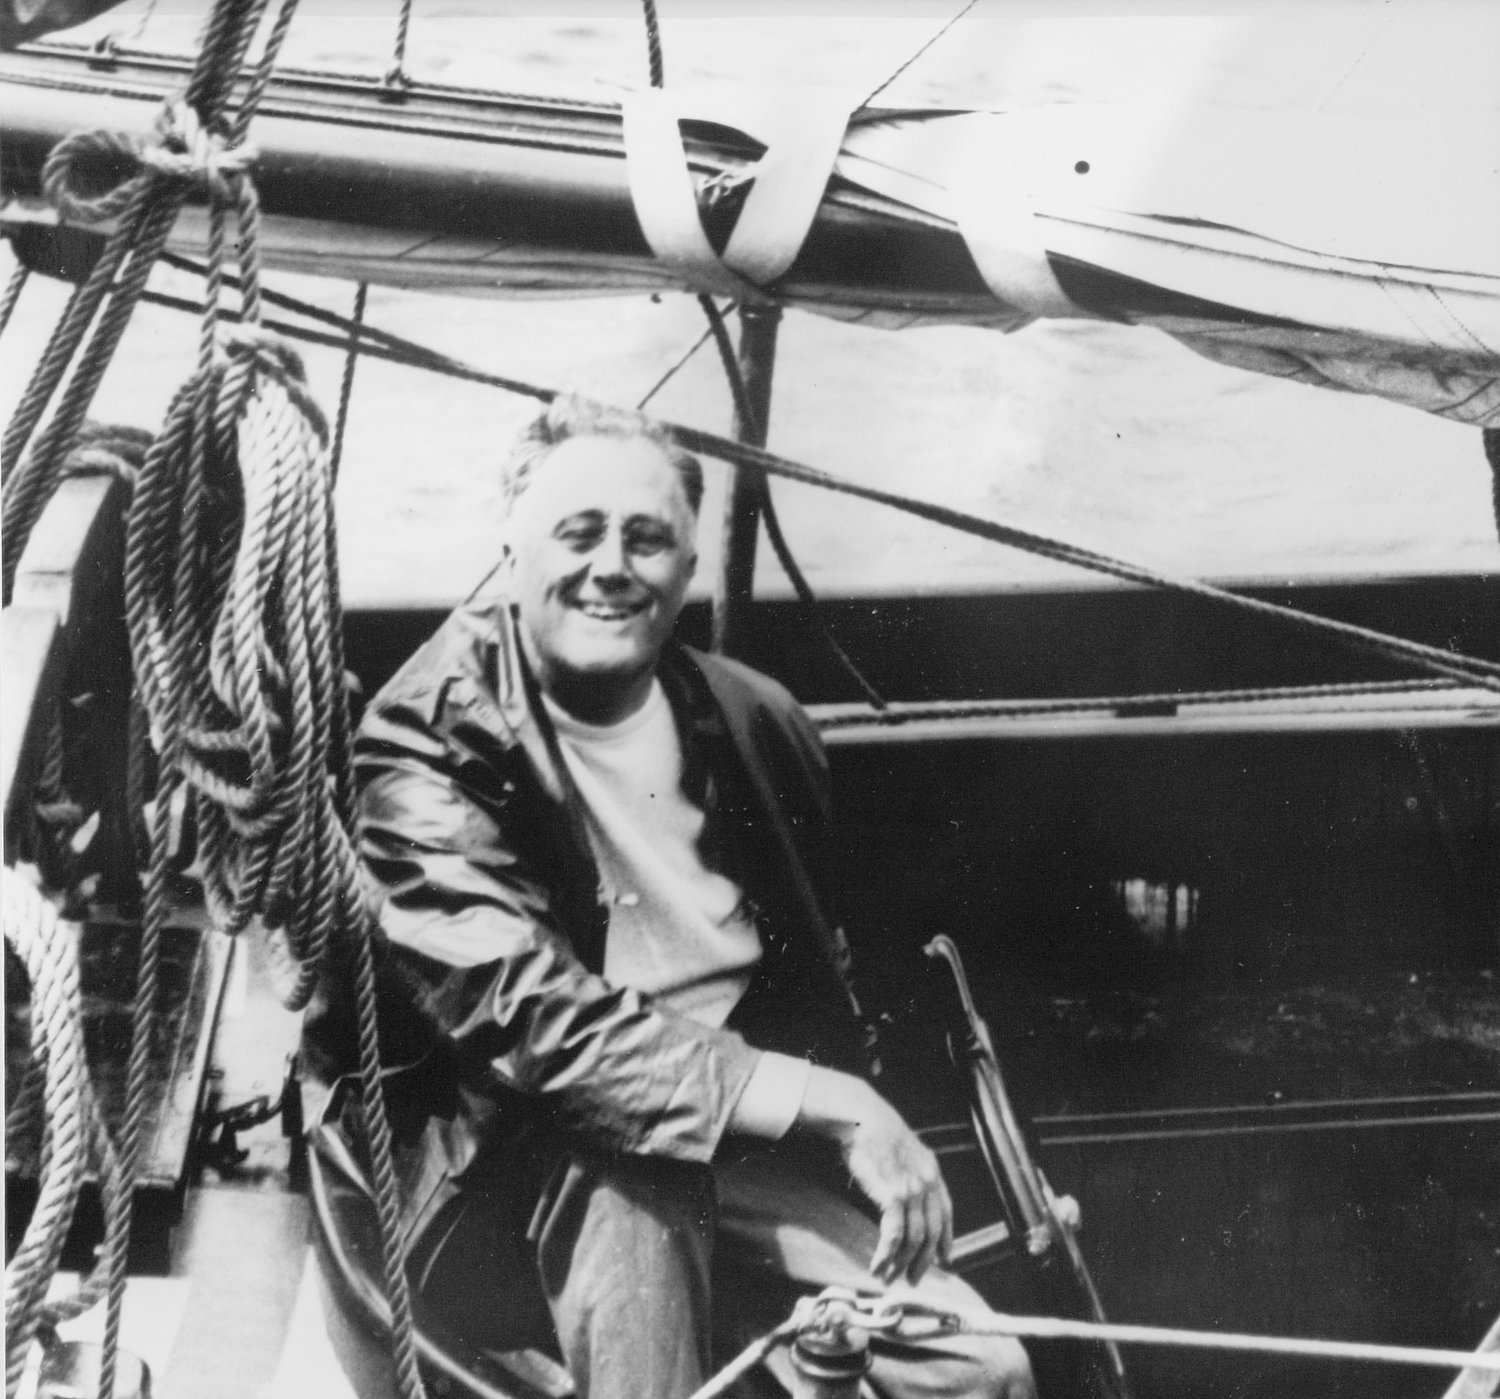 President Franklin D. Roosevelt on the yawl Amberjack, during a 1933 visit to Nantucket.